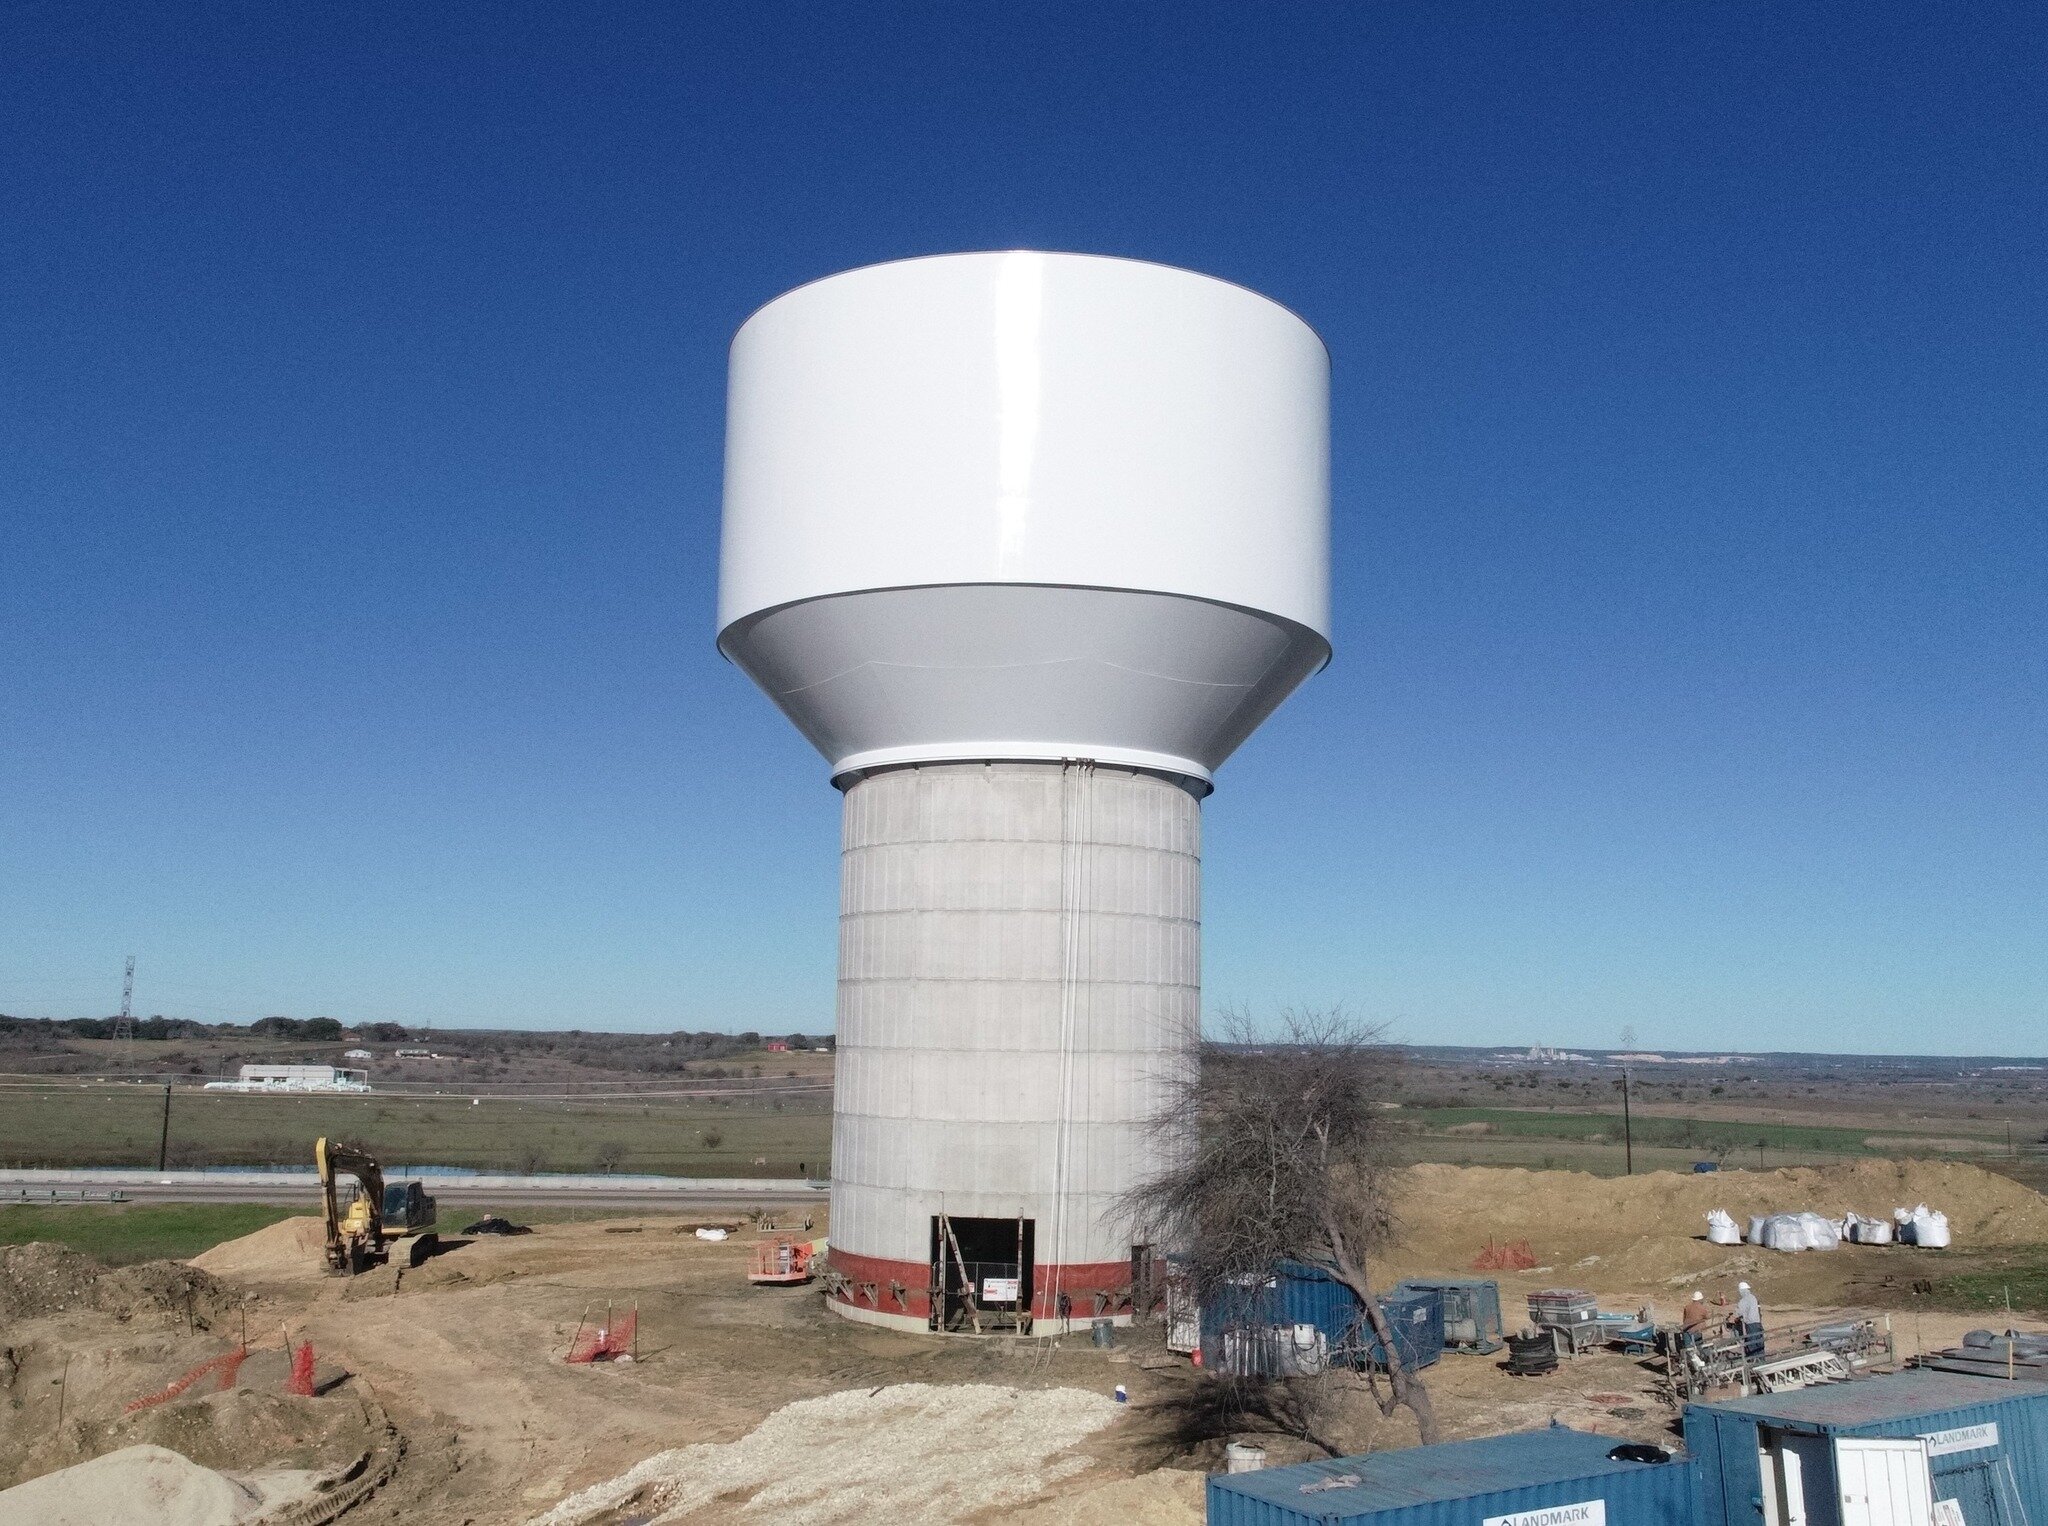 The new year is off to a great start as we cross some exciting project milestones 📈✅

At the end of January, our crews successfully lifted and sealed the bowl of our South Elevated Storage Tank, shown above. Once the bowl was raised and sealed to th